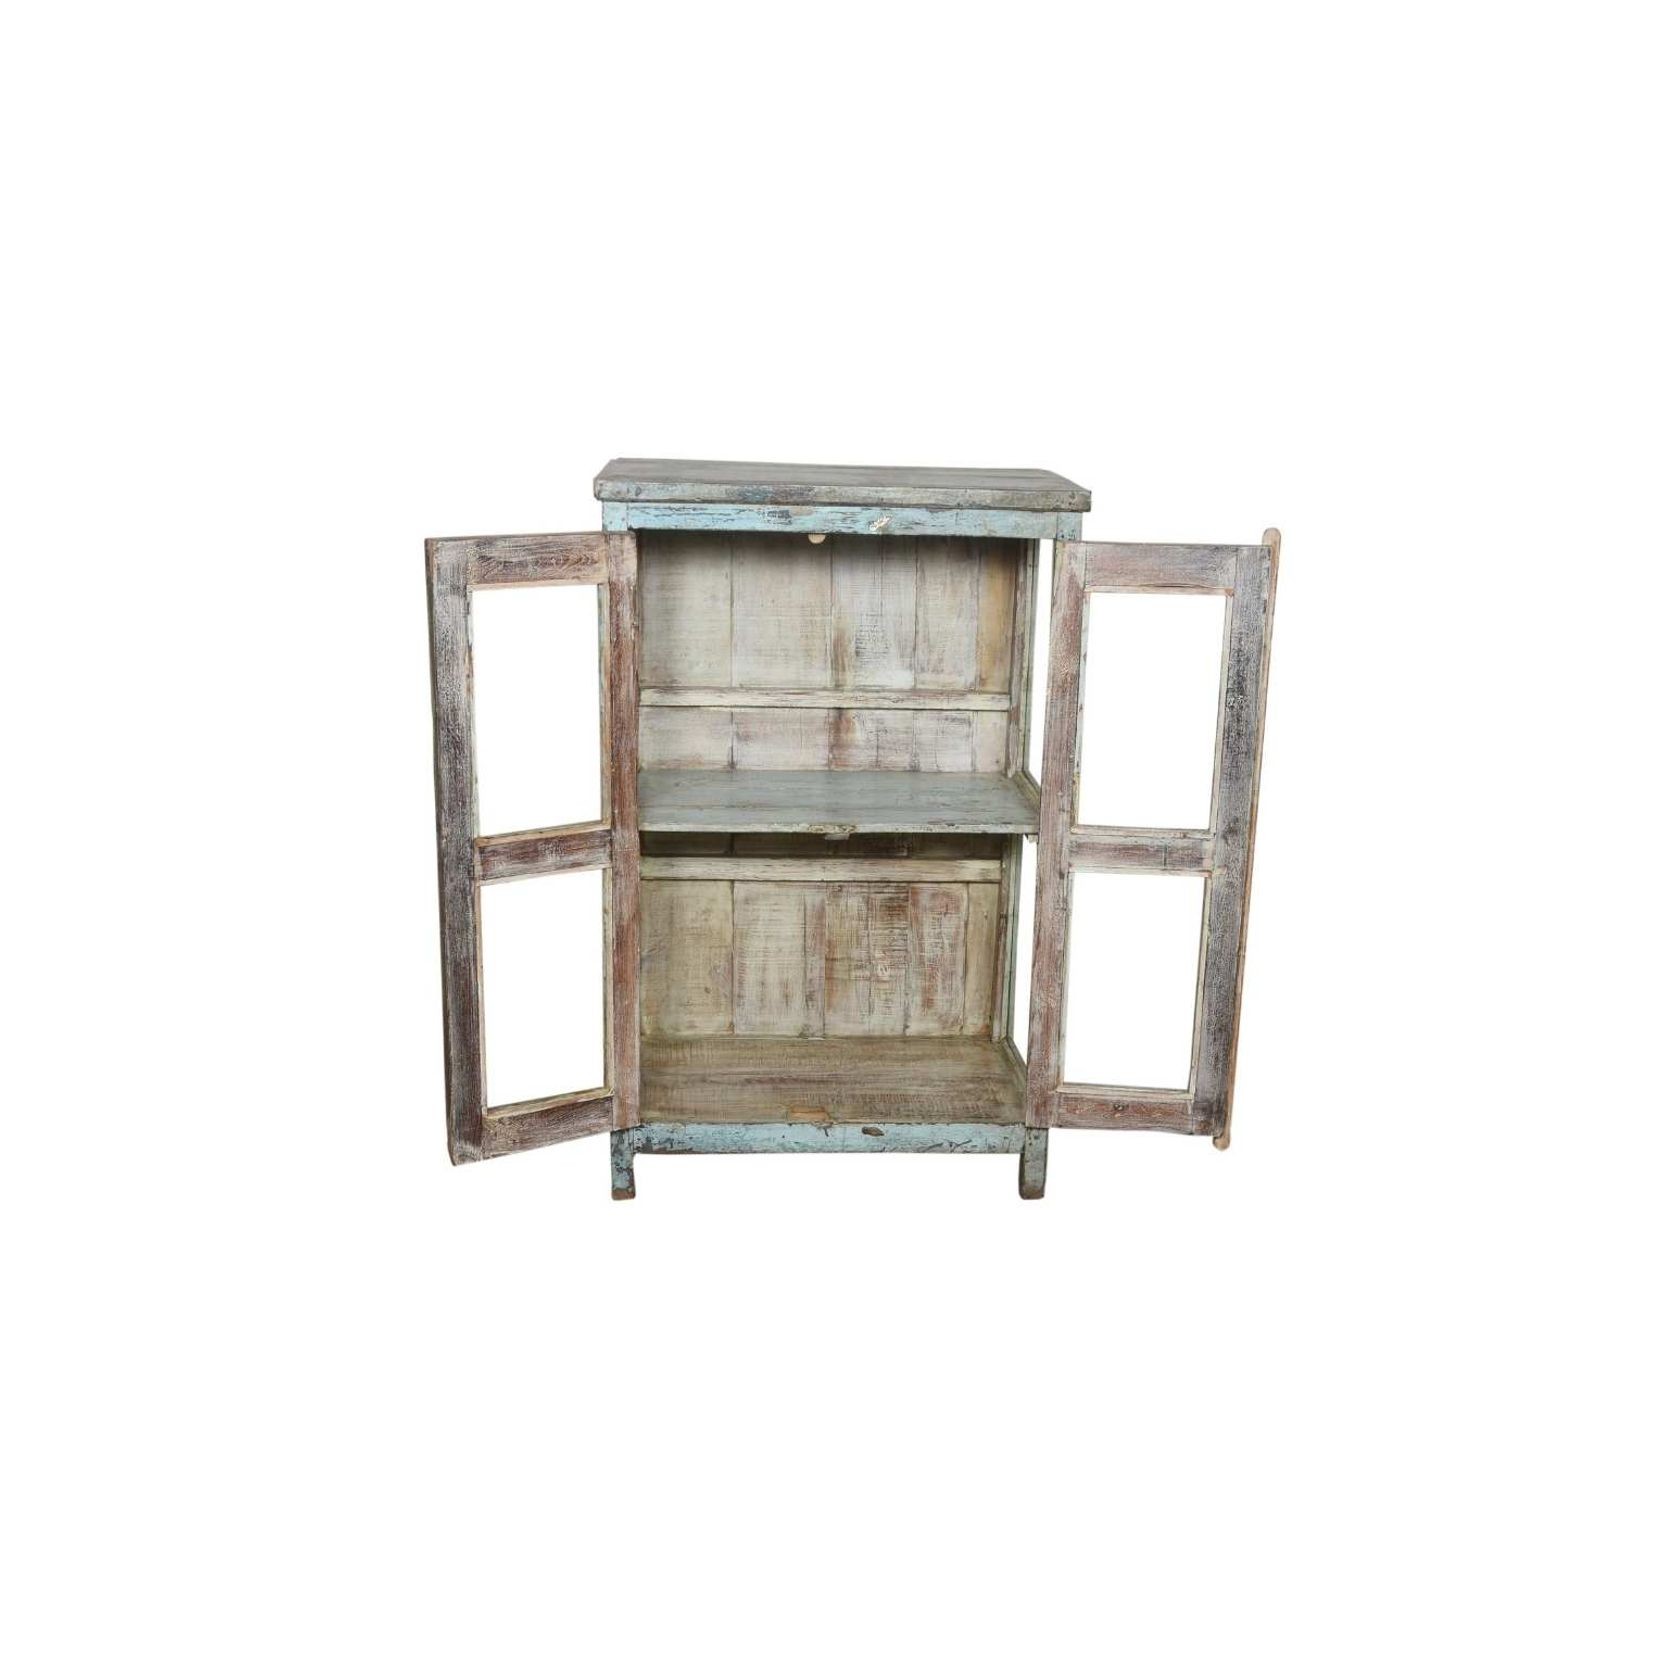 Original Wood and Glass Display Cabinet - Narrow gallery detail image